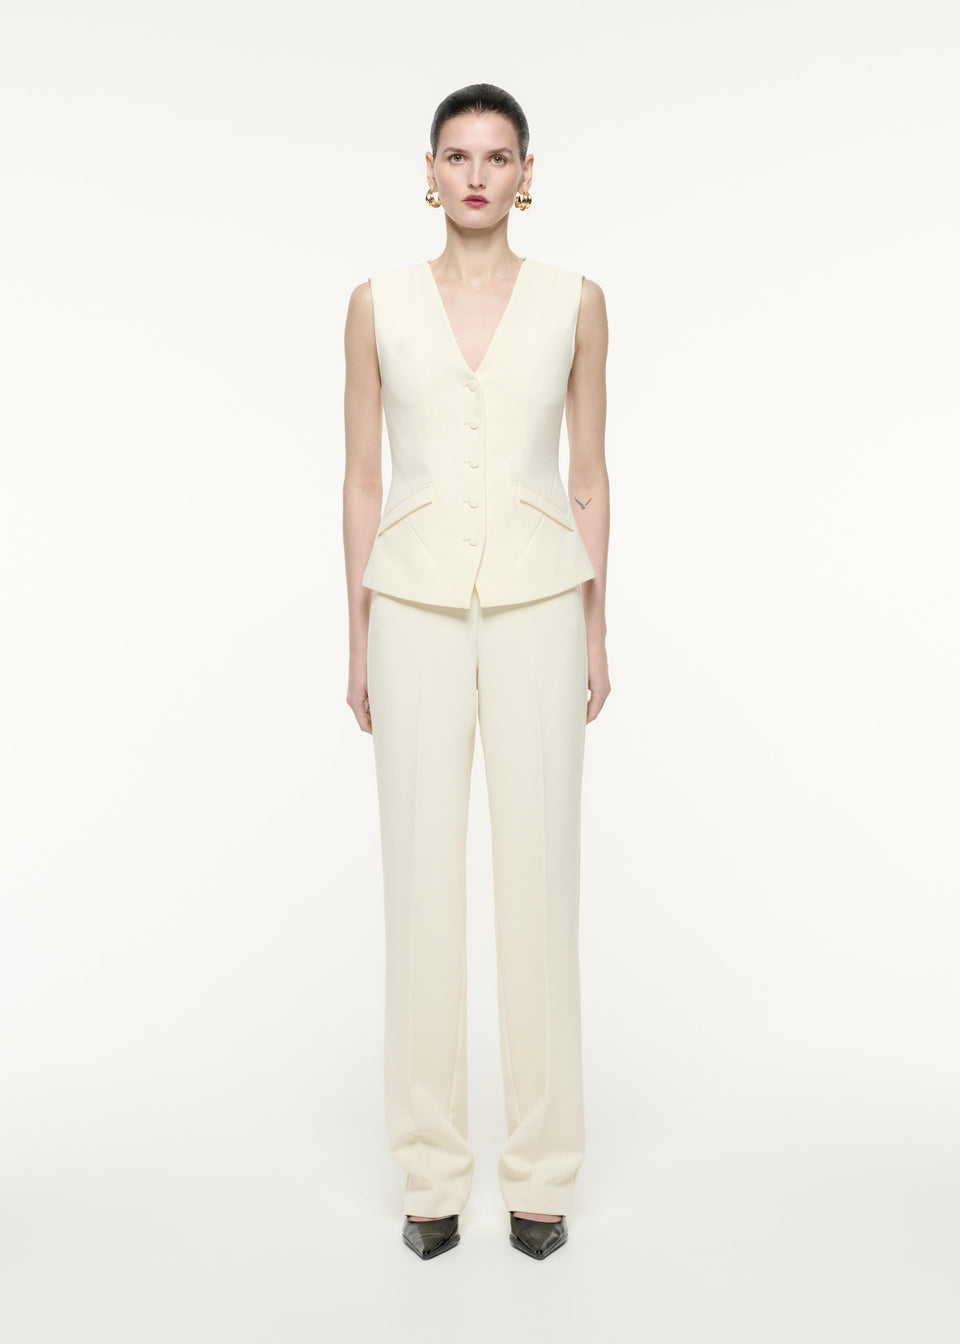 A front view image of a model wearing the Crepe Trouser in Cream